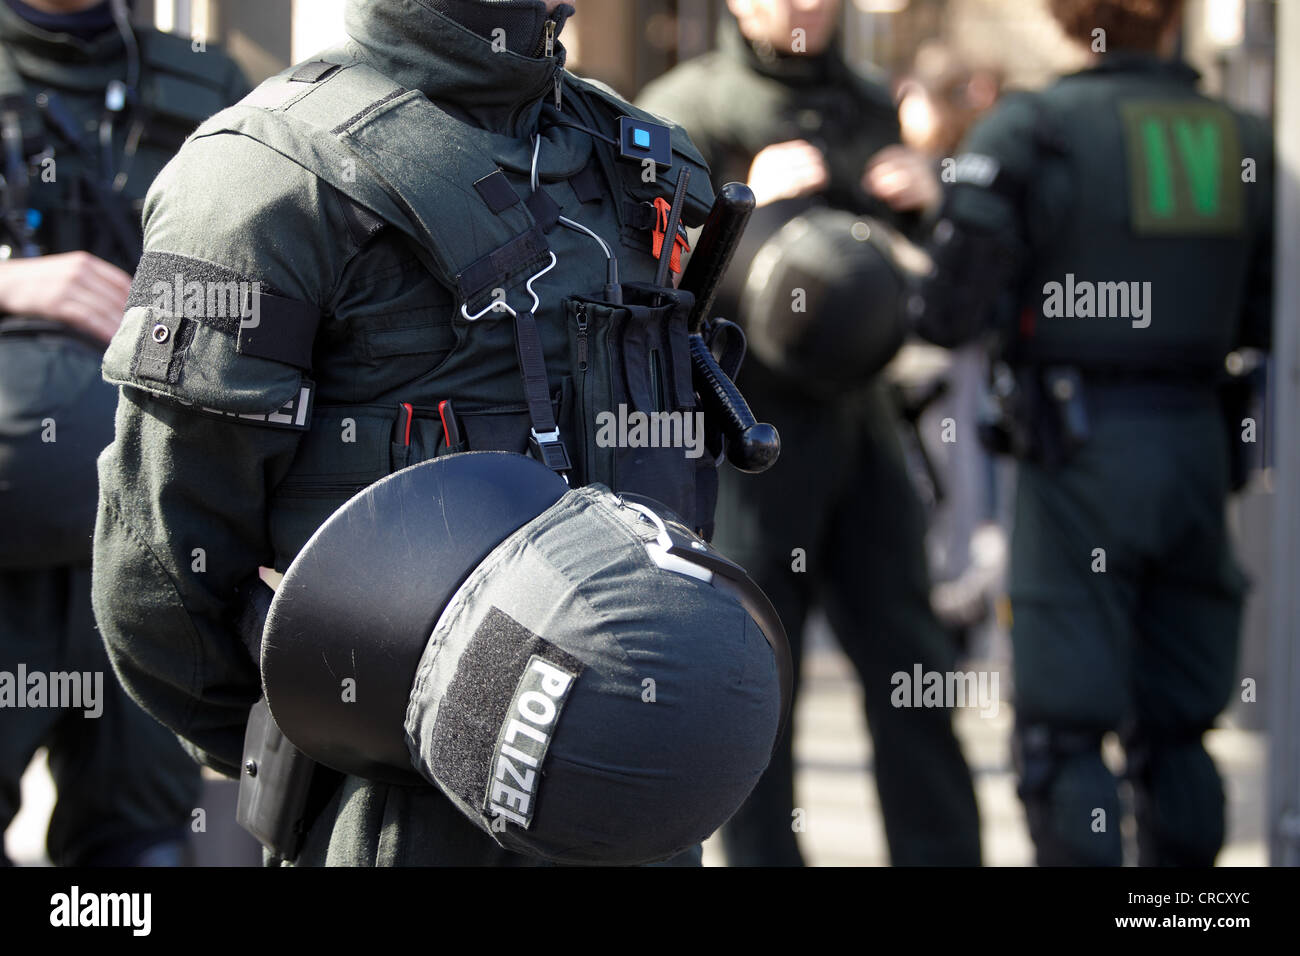 Police officers in protective clothing at a neo-Nazi demonstration in Koblenz, Rhineland-Palatinate, Germany, Europe Stock Photo